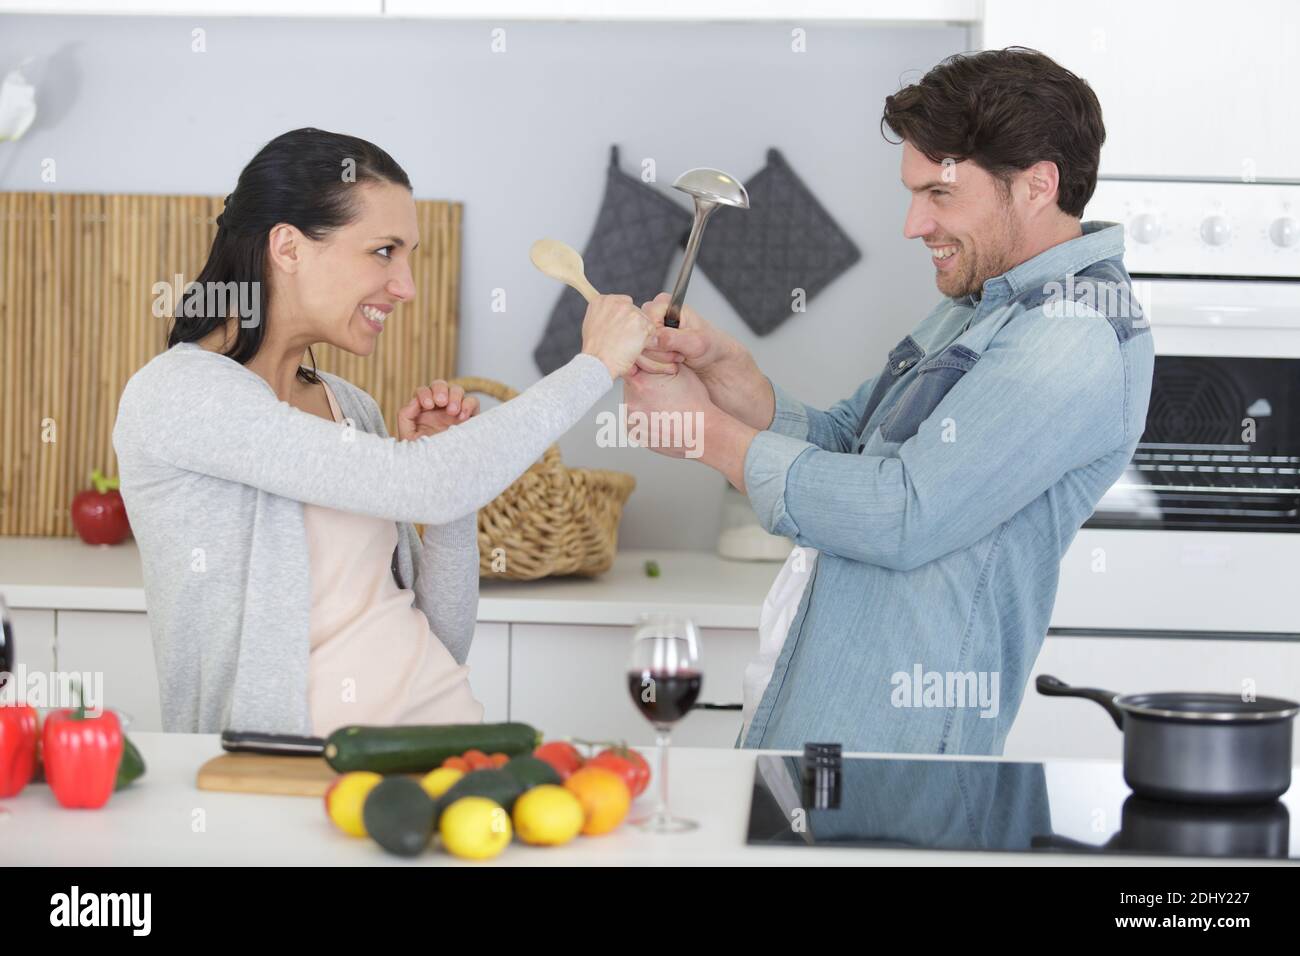 funny couple fights with utensils tools Stock Photo